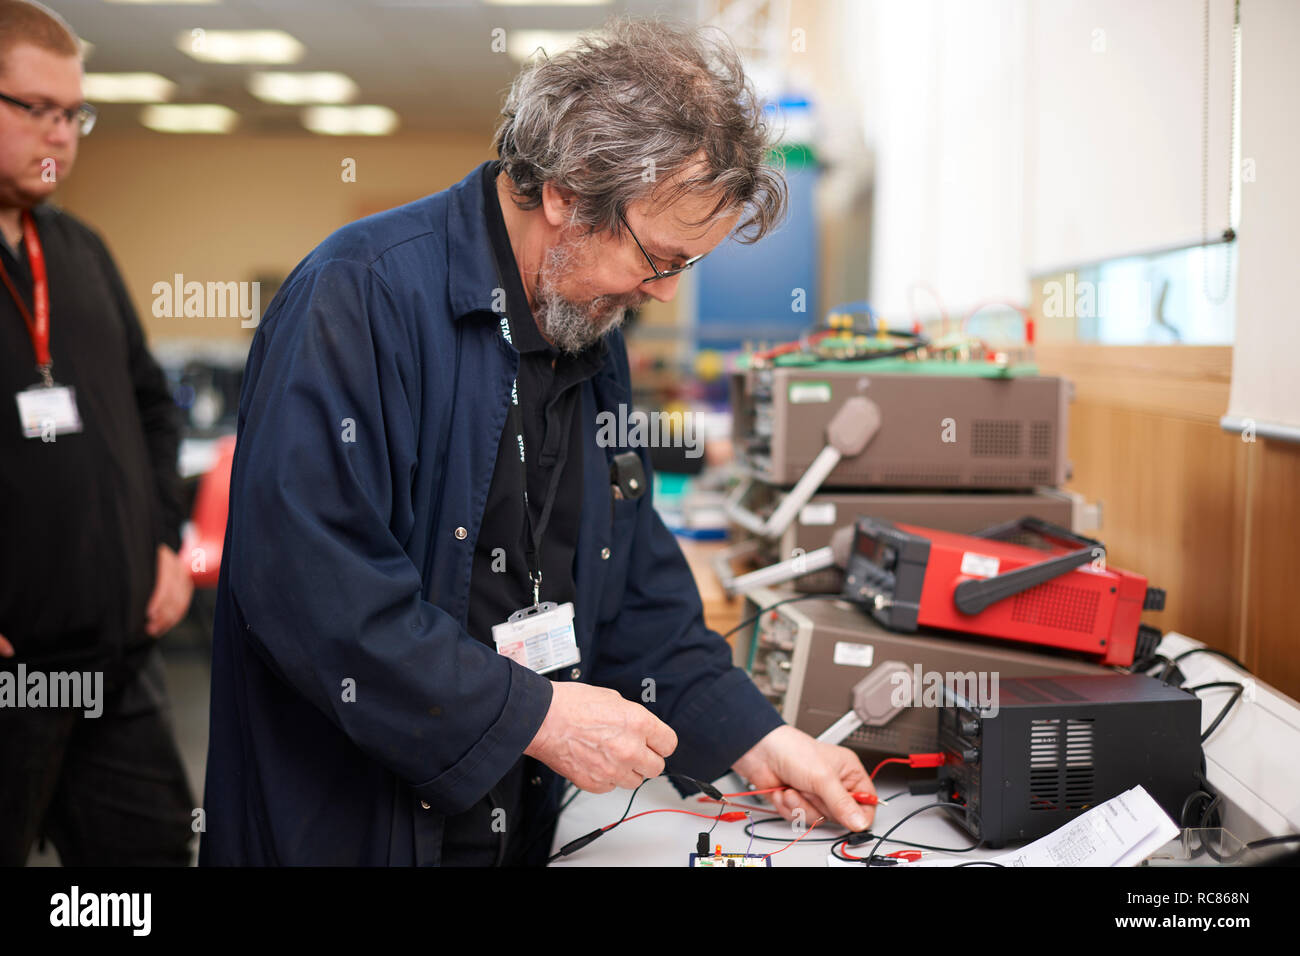 Lecturer preparing electrical instrument, student in background Stock Photo